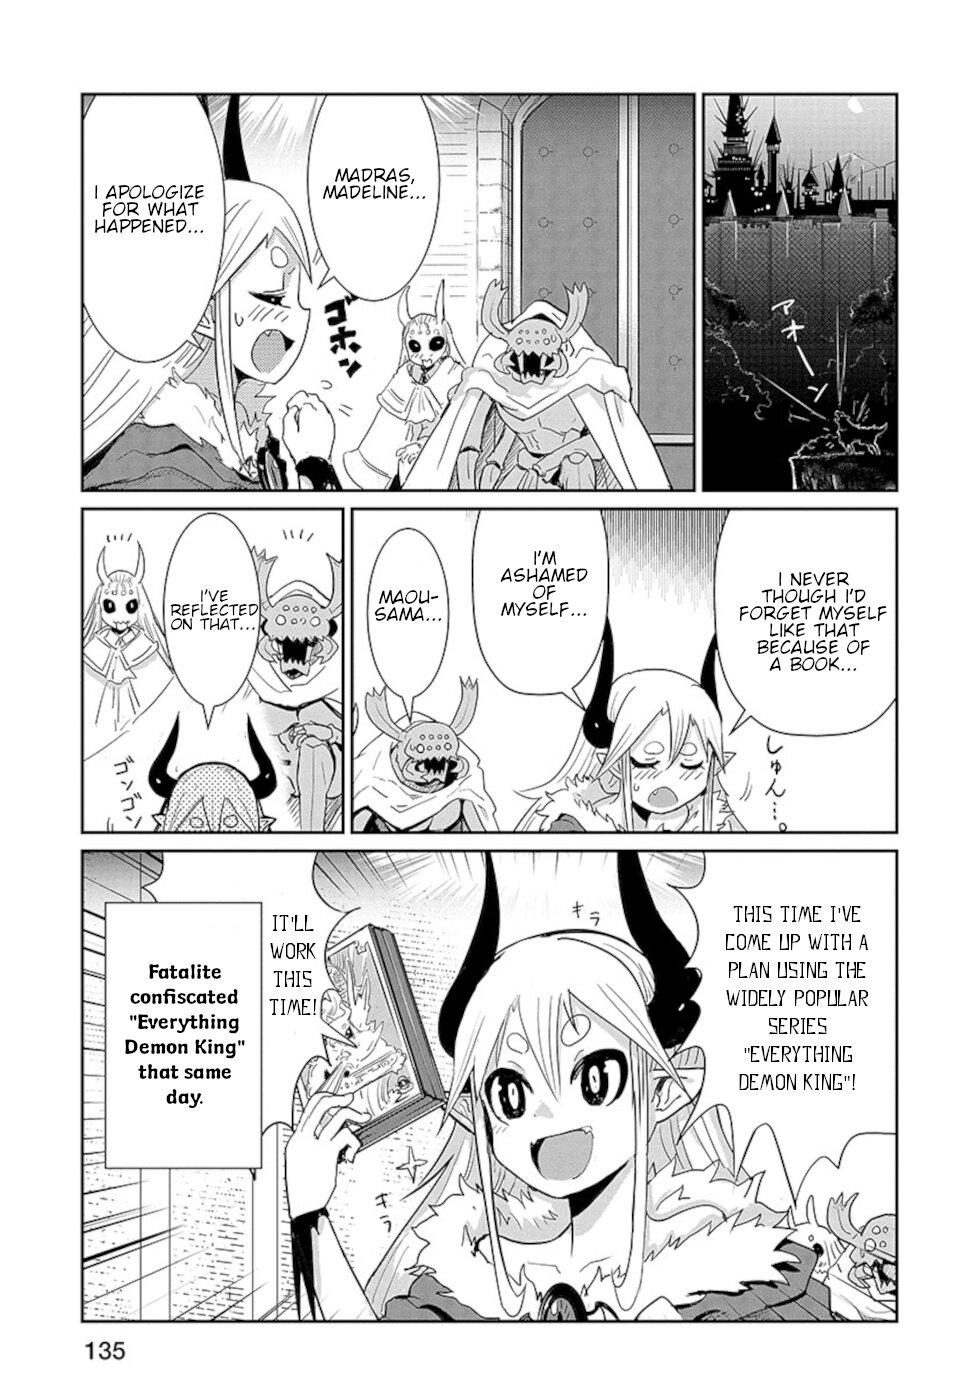 Don't Cry Maou chan Vol. 2 Ch. 15 How To Be A Great Demon King